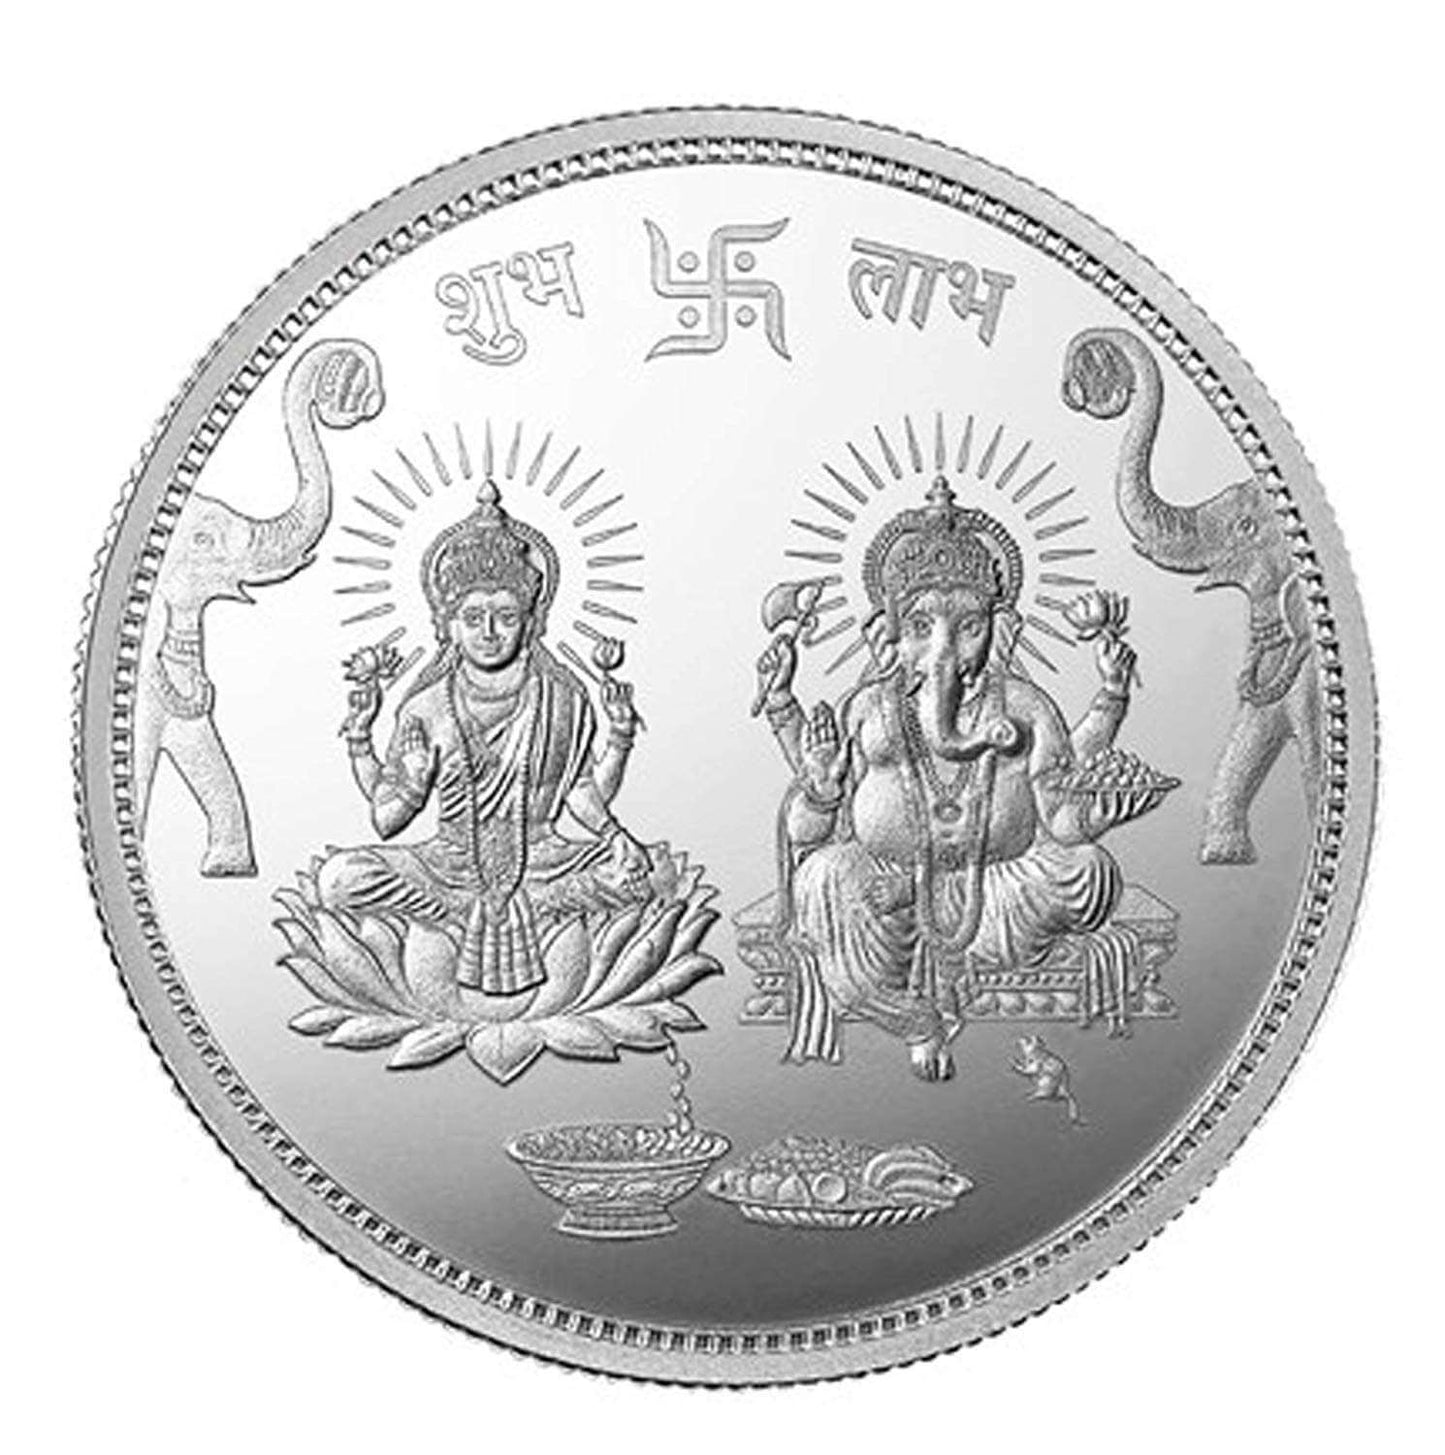 999.9 Purity Ganesh Lakshmi ji Silver Coins With Gift Wrap For Diwali ( Pack Of 4 )